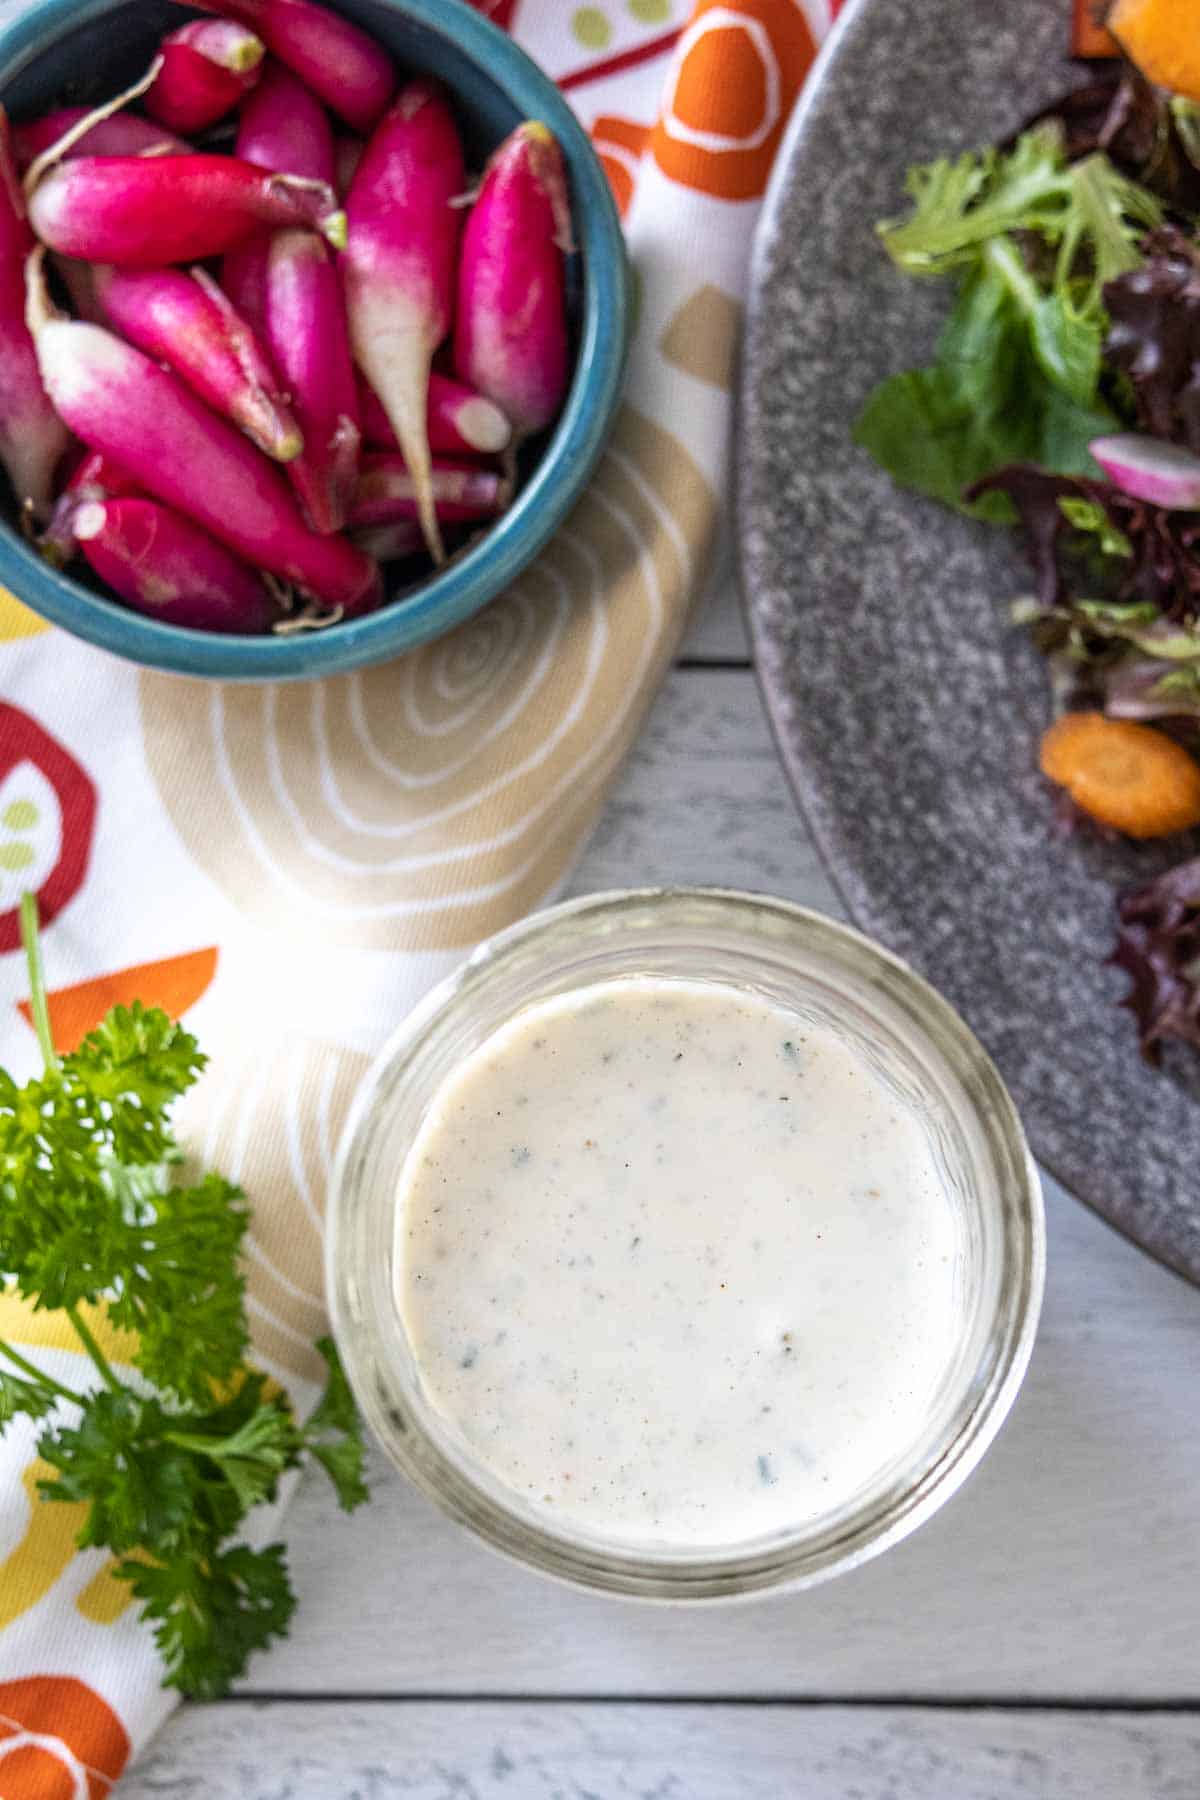 https://www.stetted.com/wp-content/uploads/2022/11/Ranch-Dressing-Photo.jpg